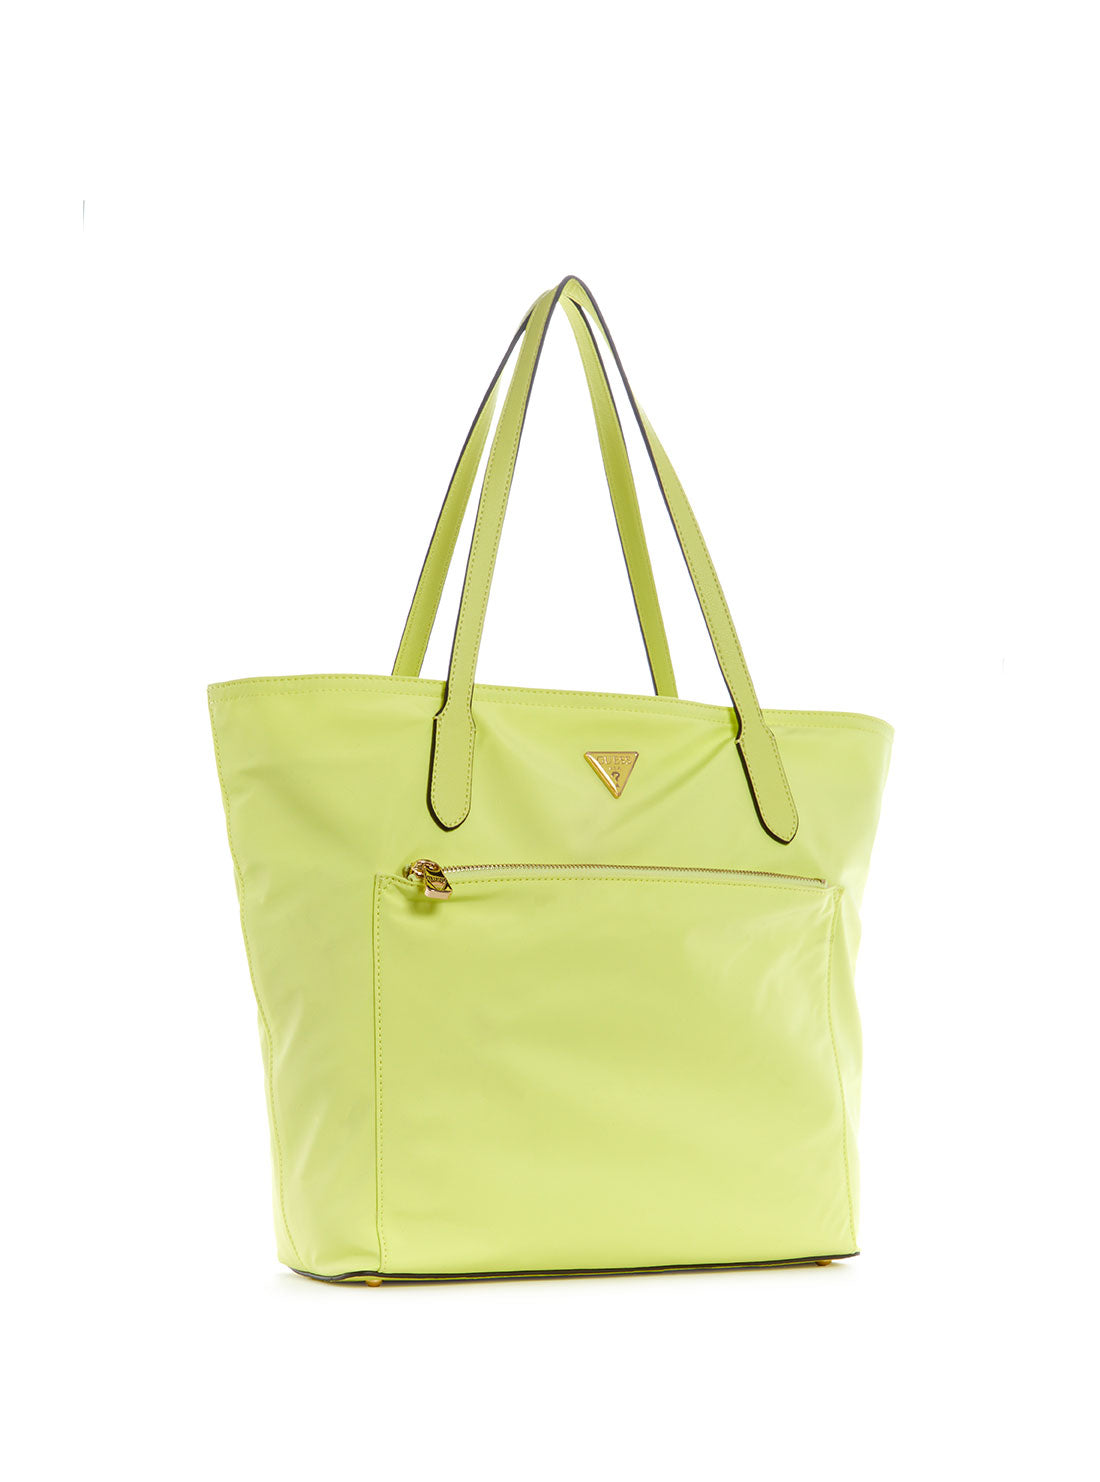 GUESS Women's Eco Lime Green Gemma Tote Bag EYG839523 Front Side View